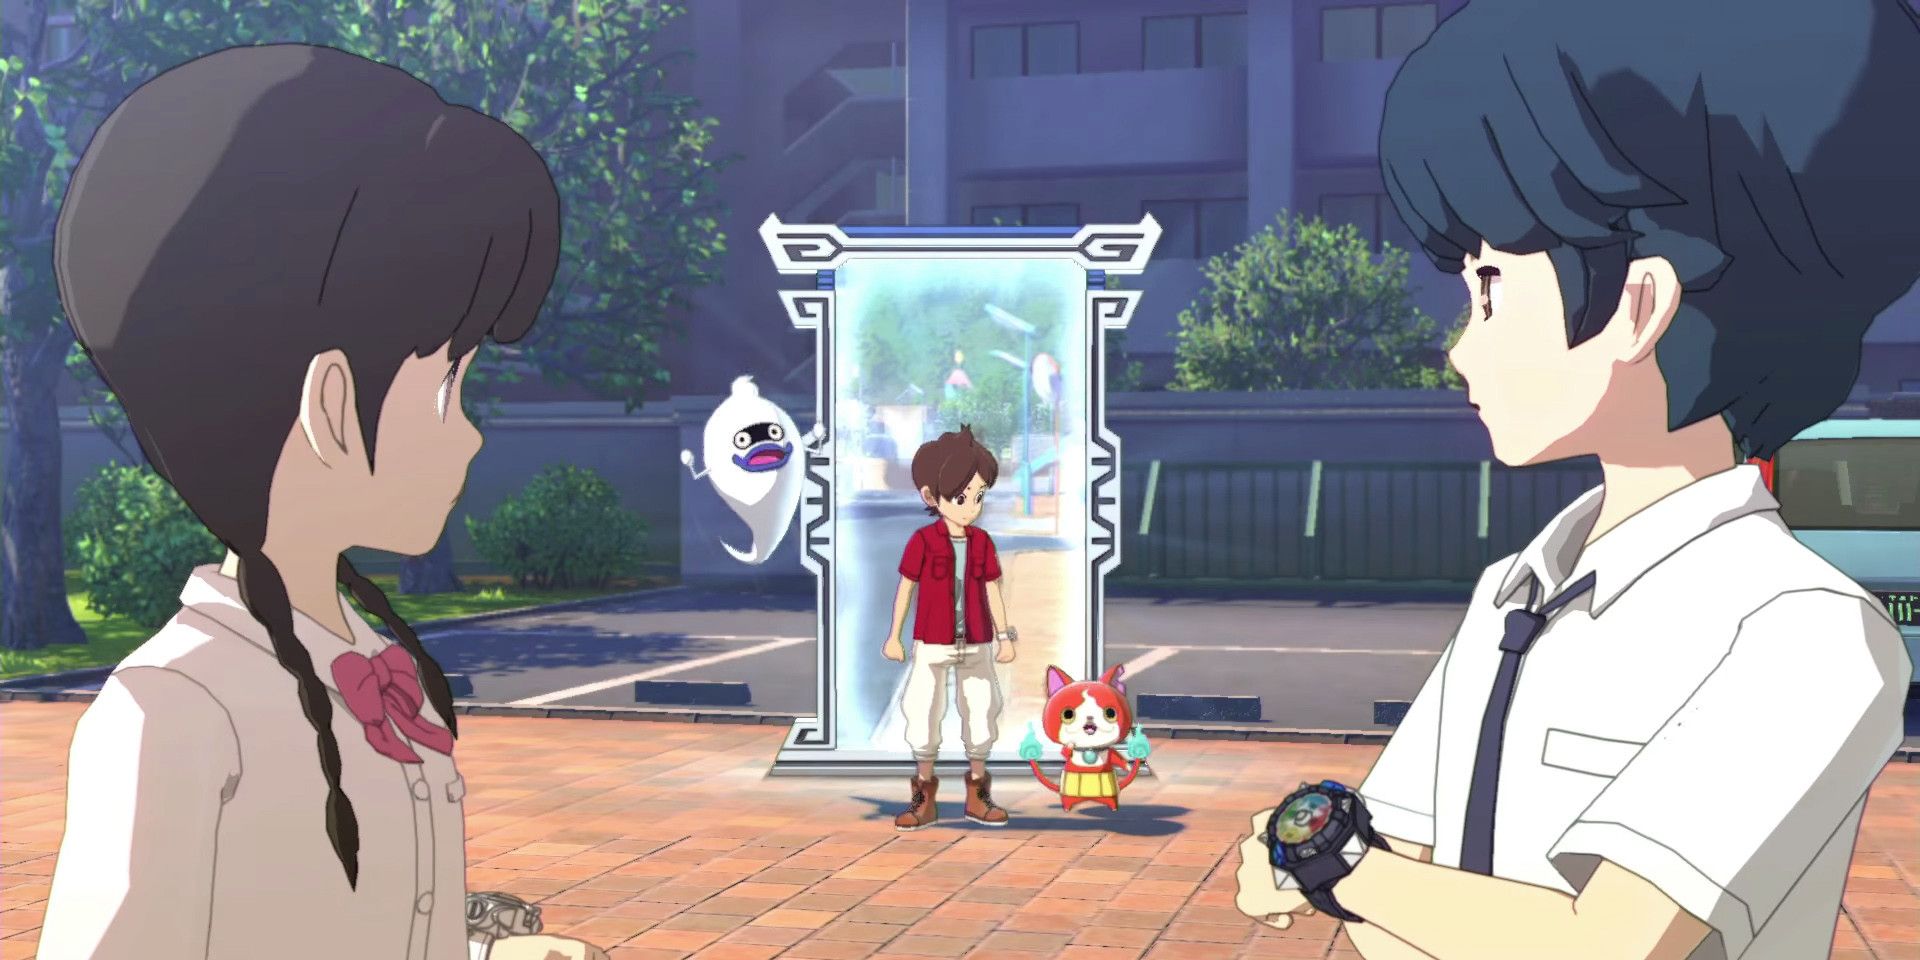 I just got yo-kai watch 4, I couldn't wait any longer for the